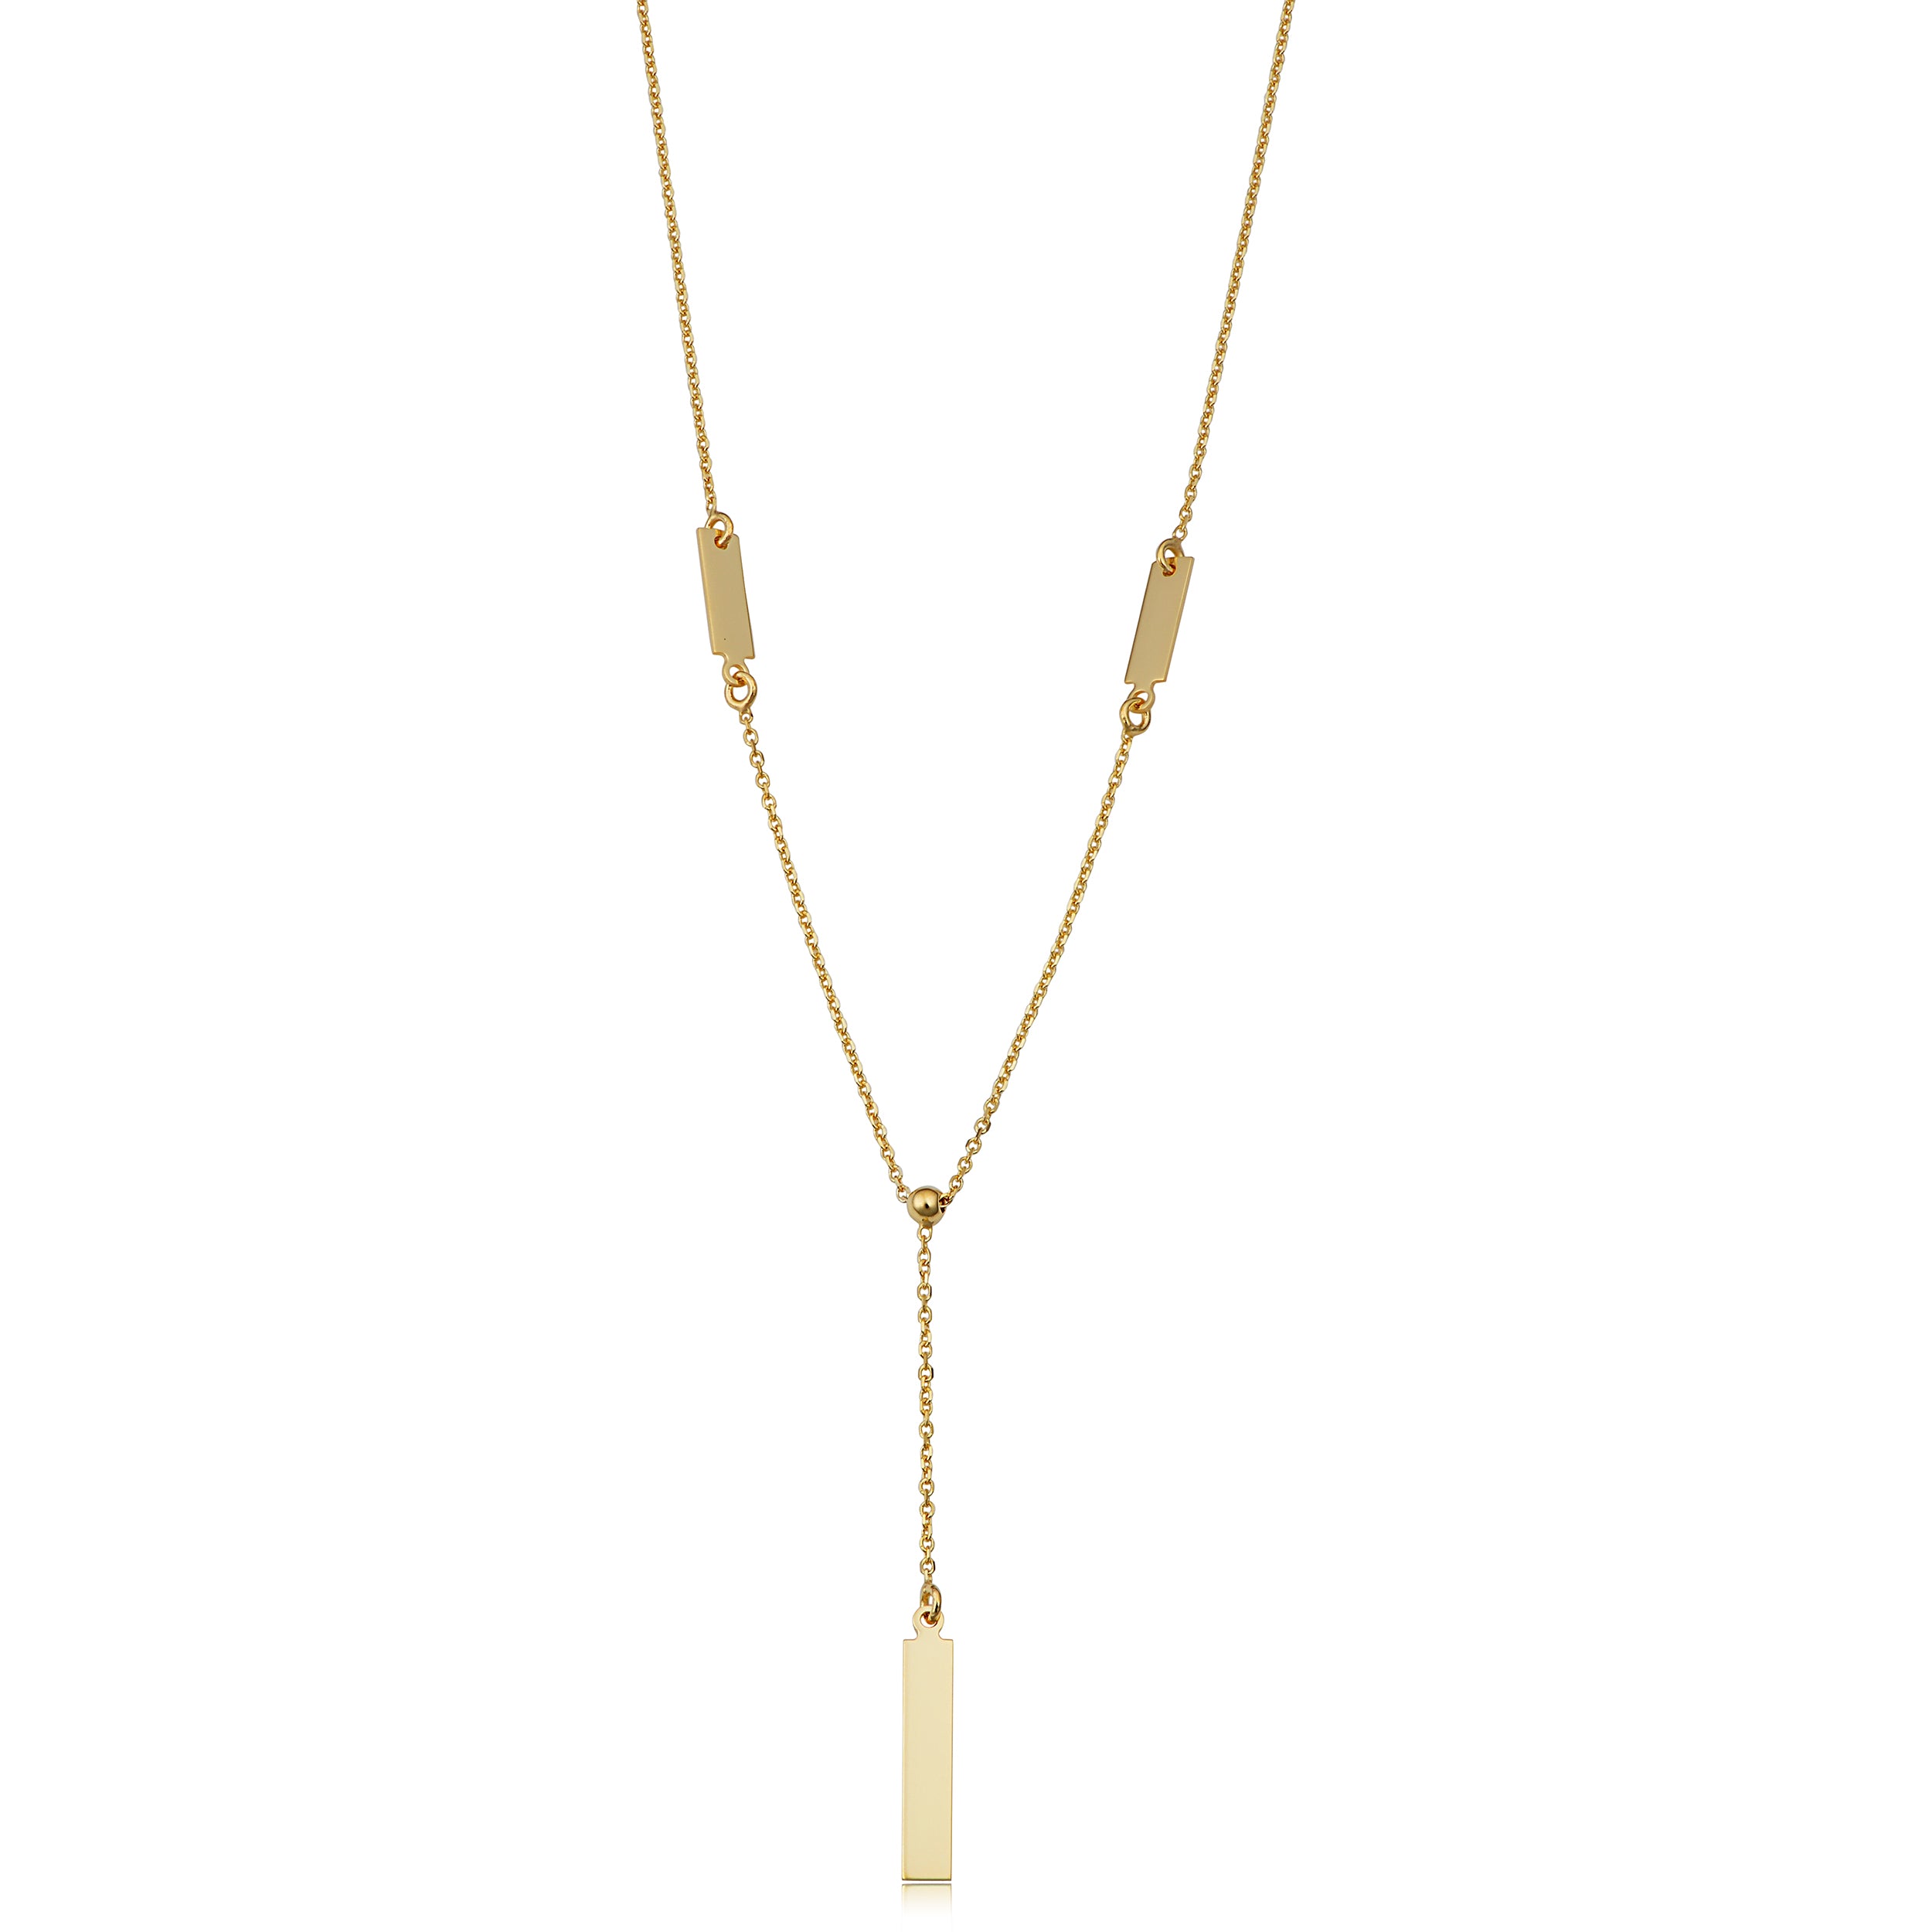 14k Yellow Gold Bar Drop Adjustable Necklace, 18" fine designer jewelry for men and women